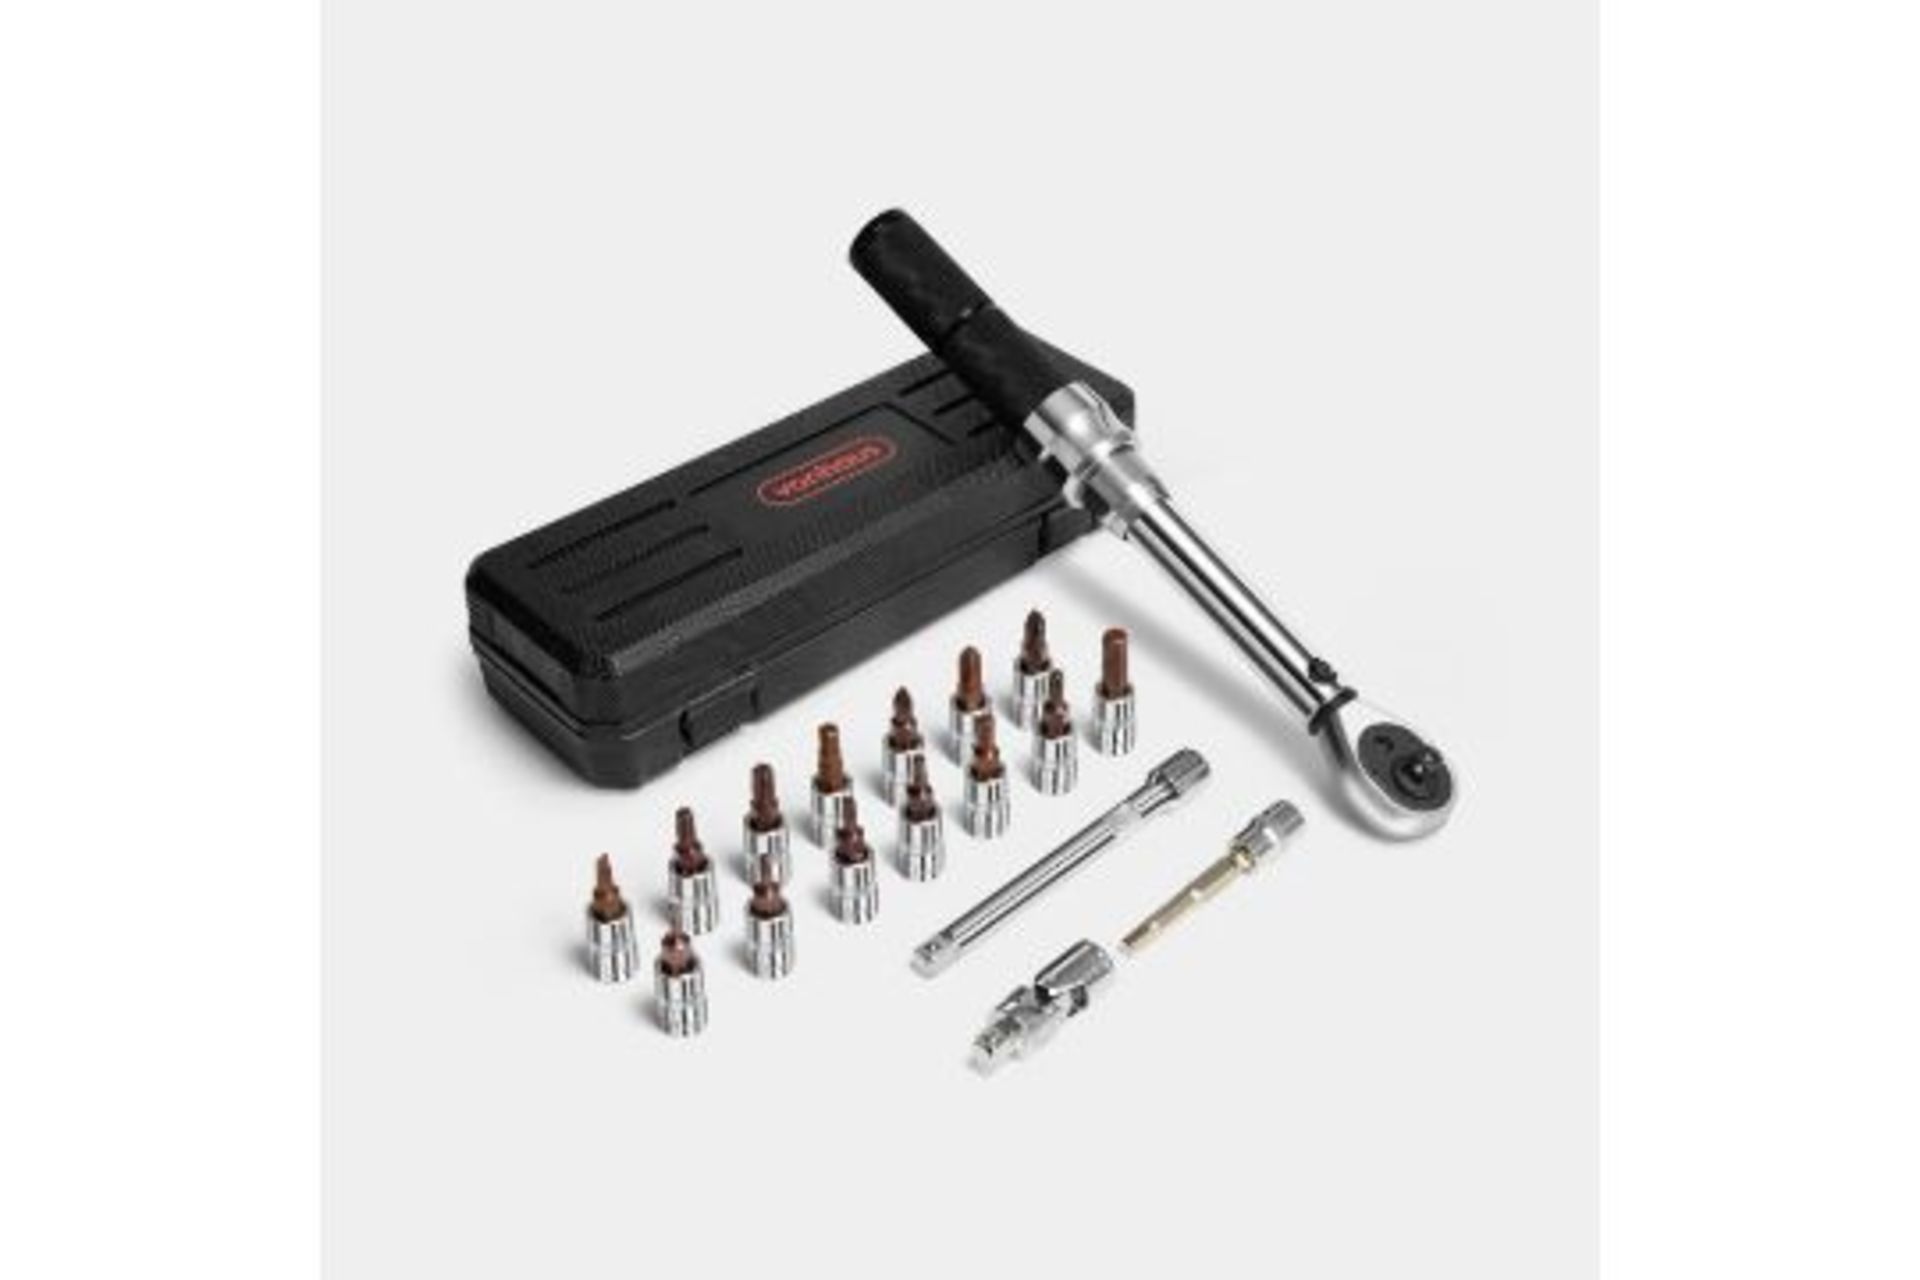 19Pc Bike Torque Wrench Kit. - PW. Tighten up your bike and keep it in great condition for longer